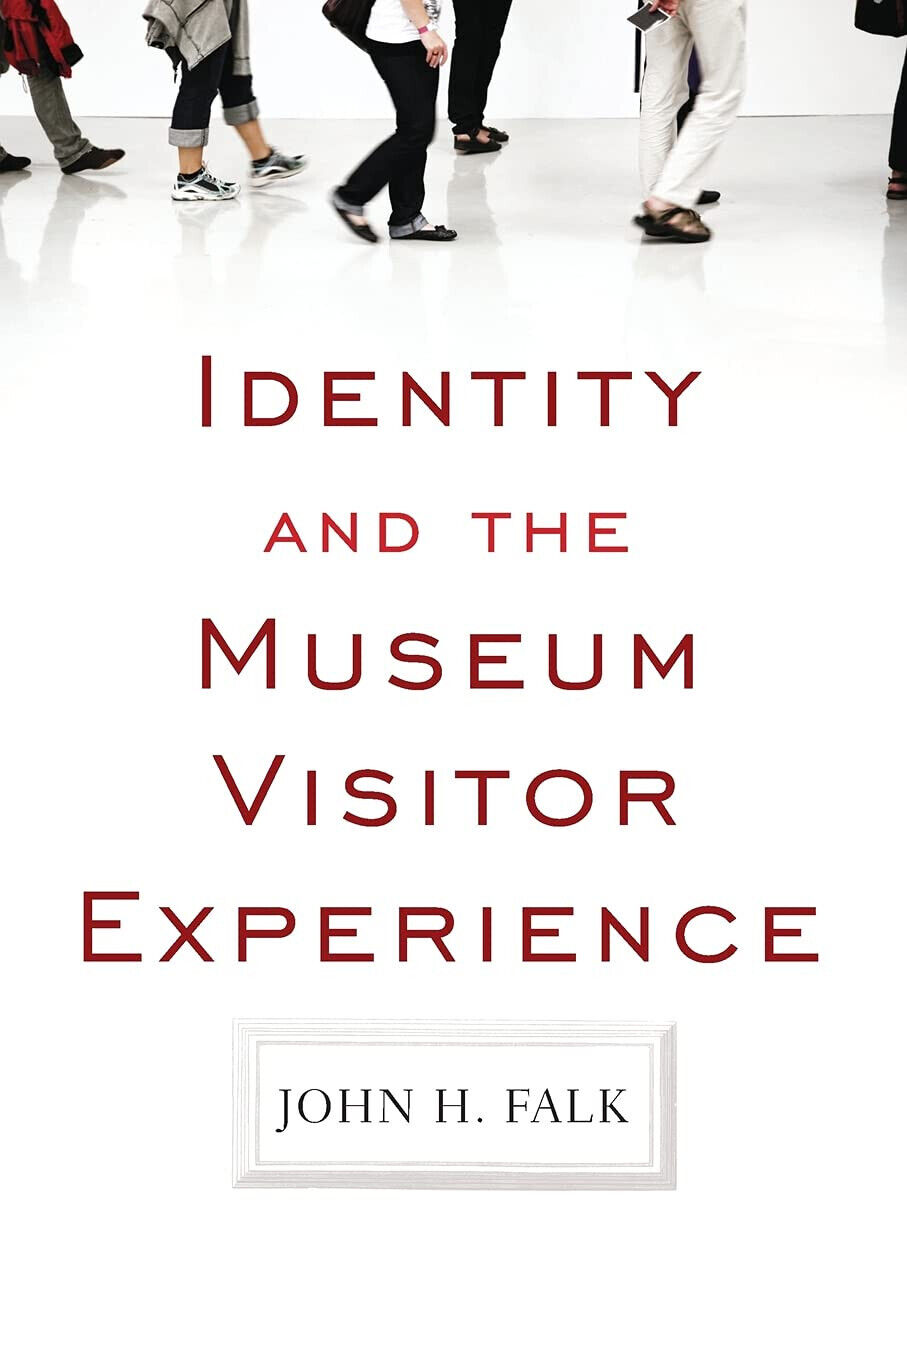 Identity and the Museum Visitor Experience - John H. Falk - Routledge, 2012